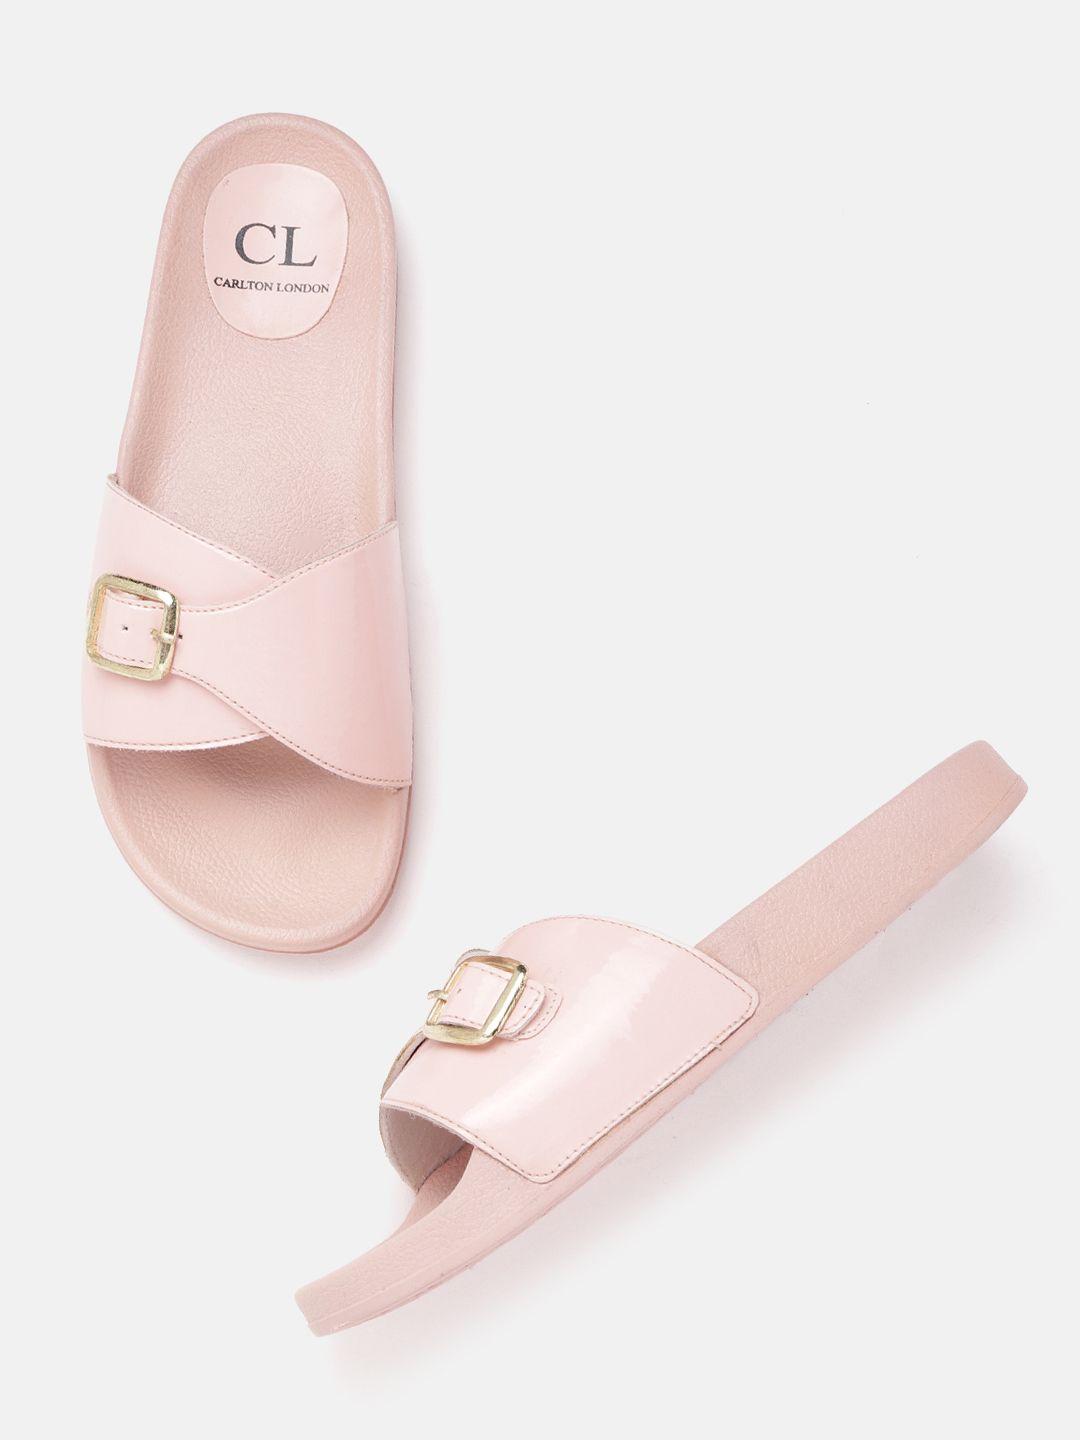 carlton london women pink solid open toe flats with buckle detail